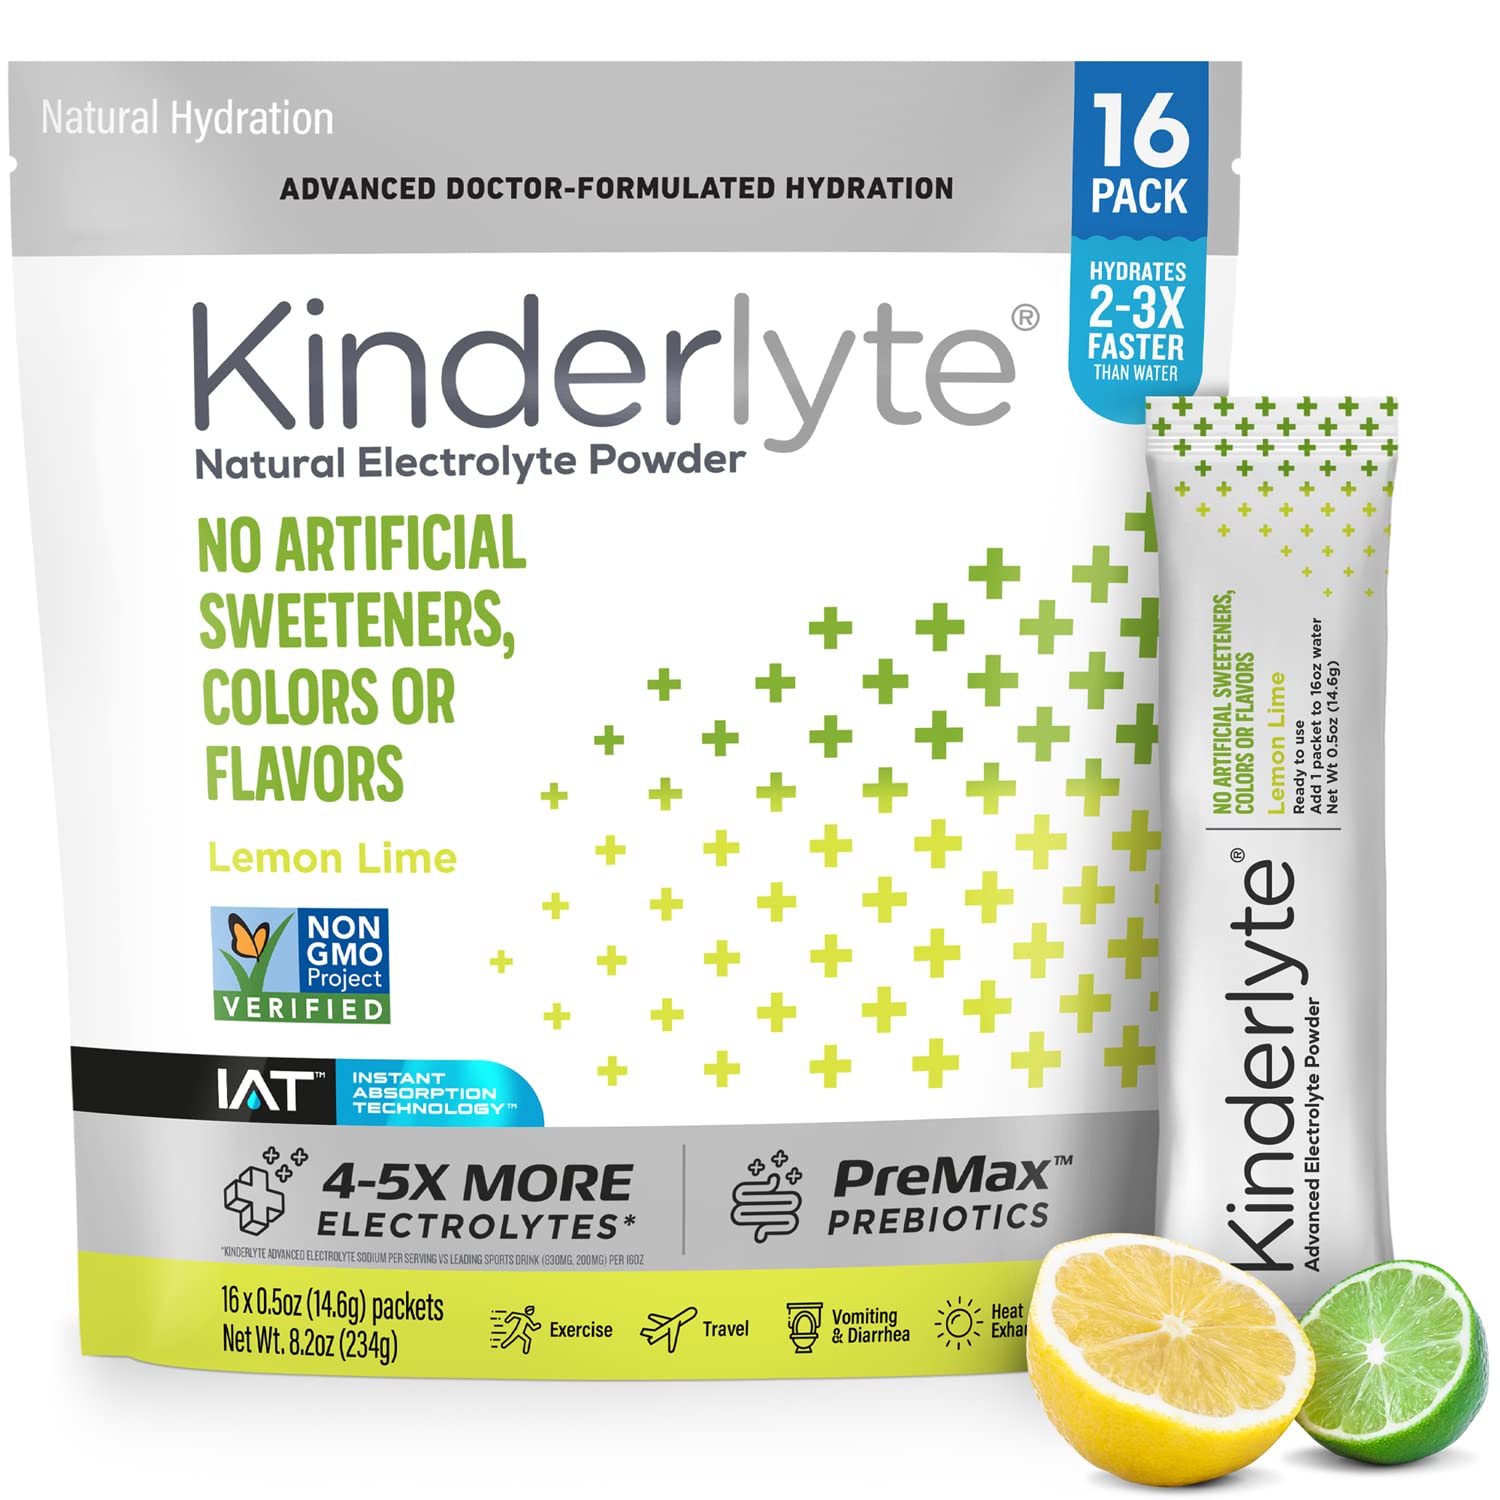 Kinderlyte Electrolyte Powder, Advanced Hydration, Easy Open Packets,